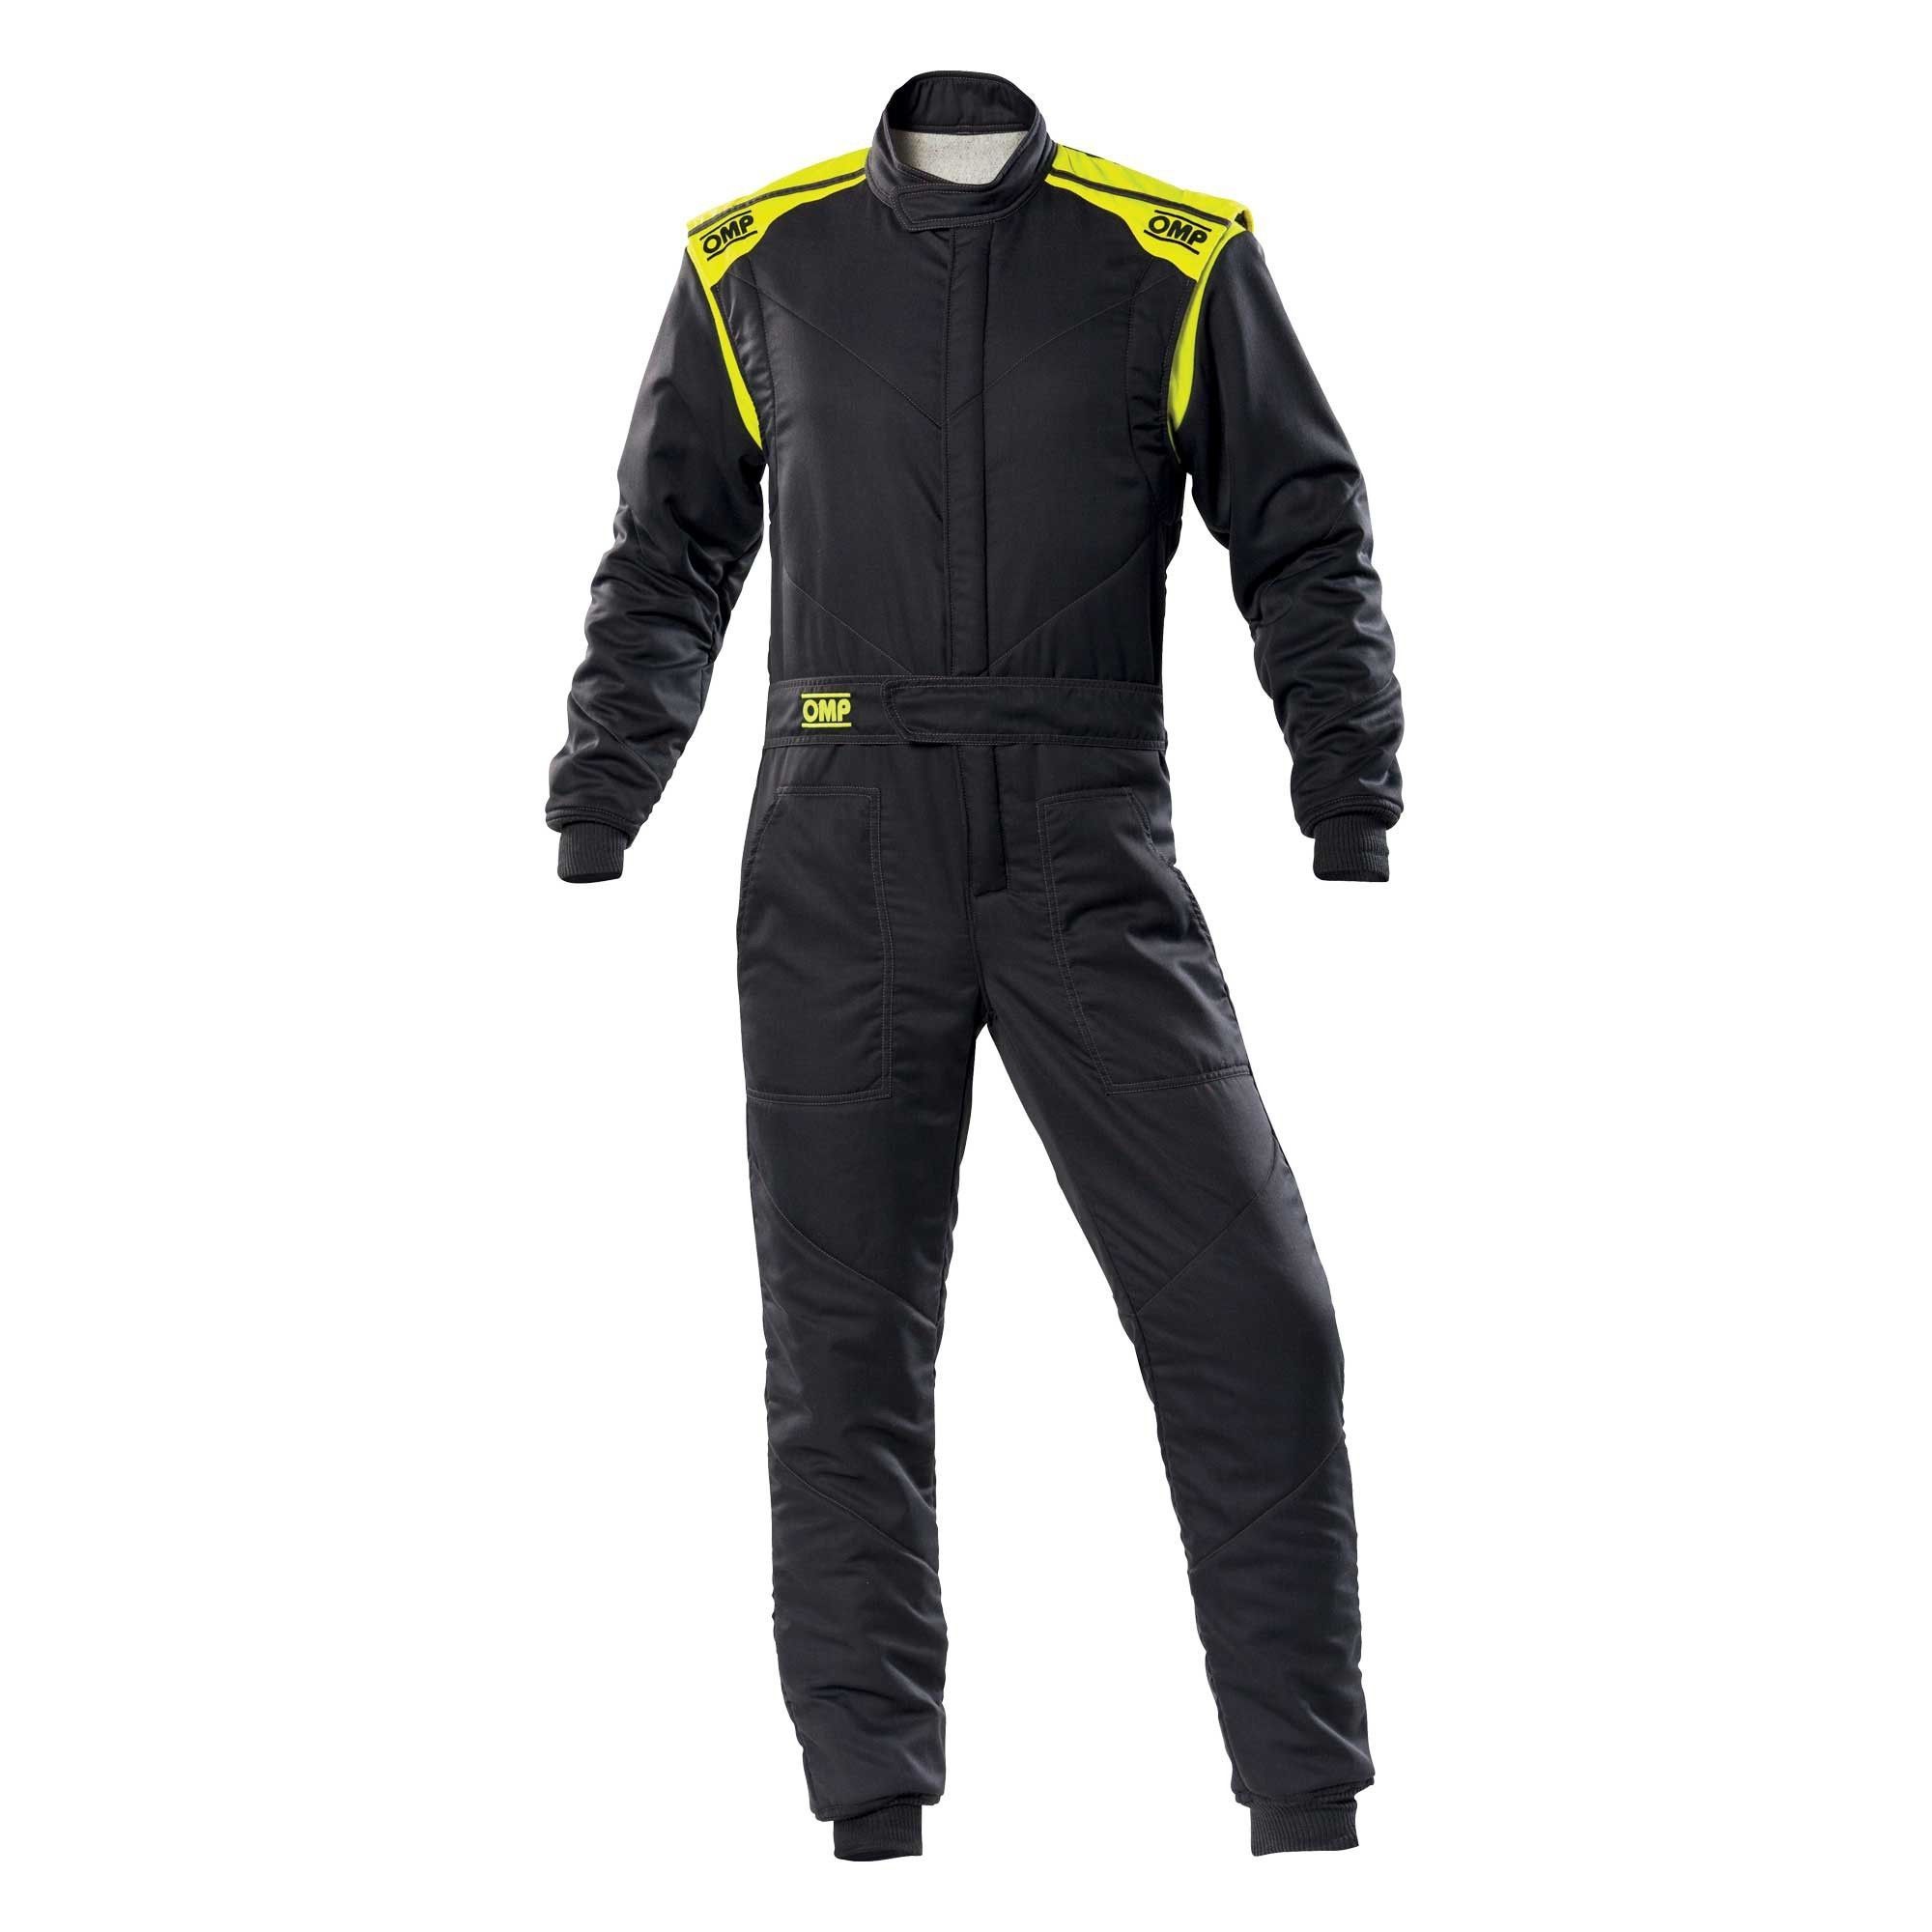 Entry Level FIA Homologated Racing Suit